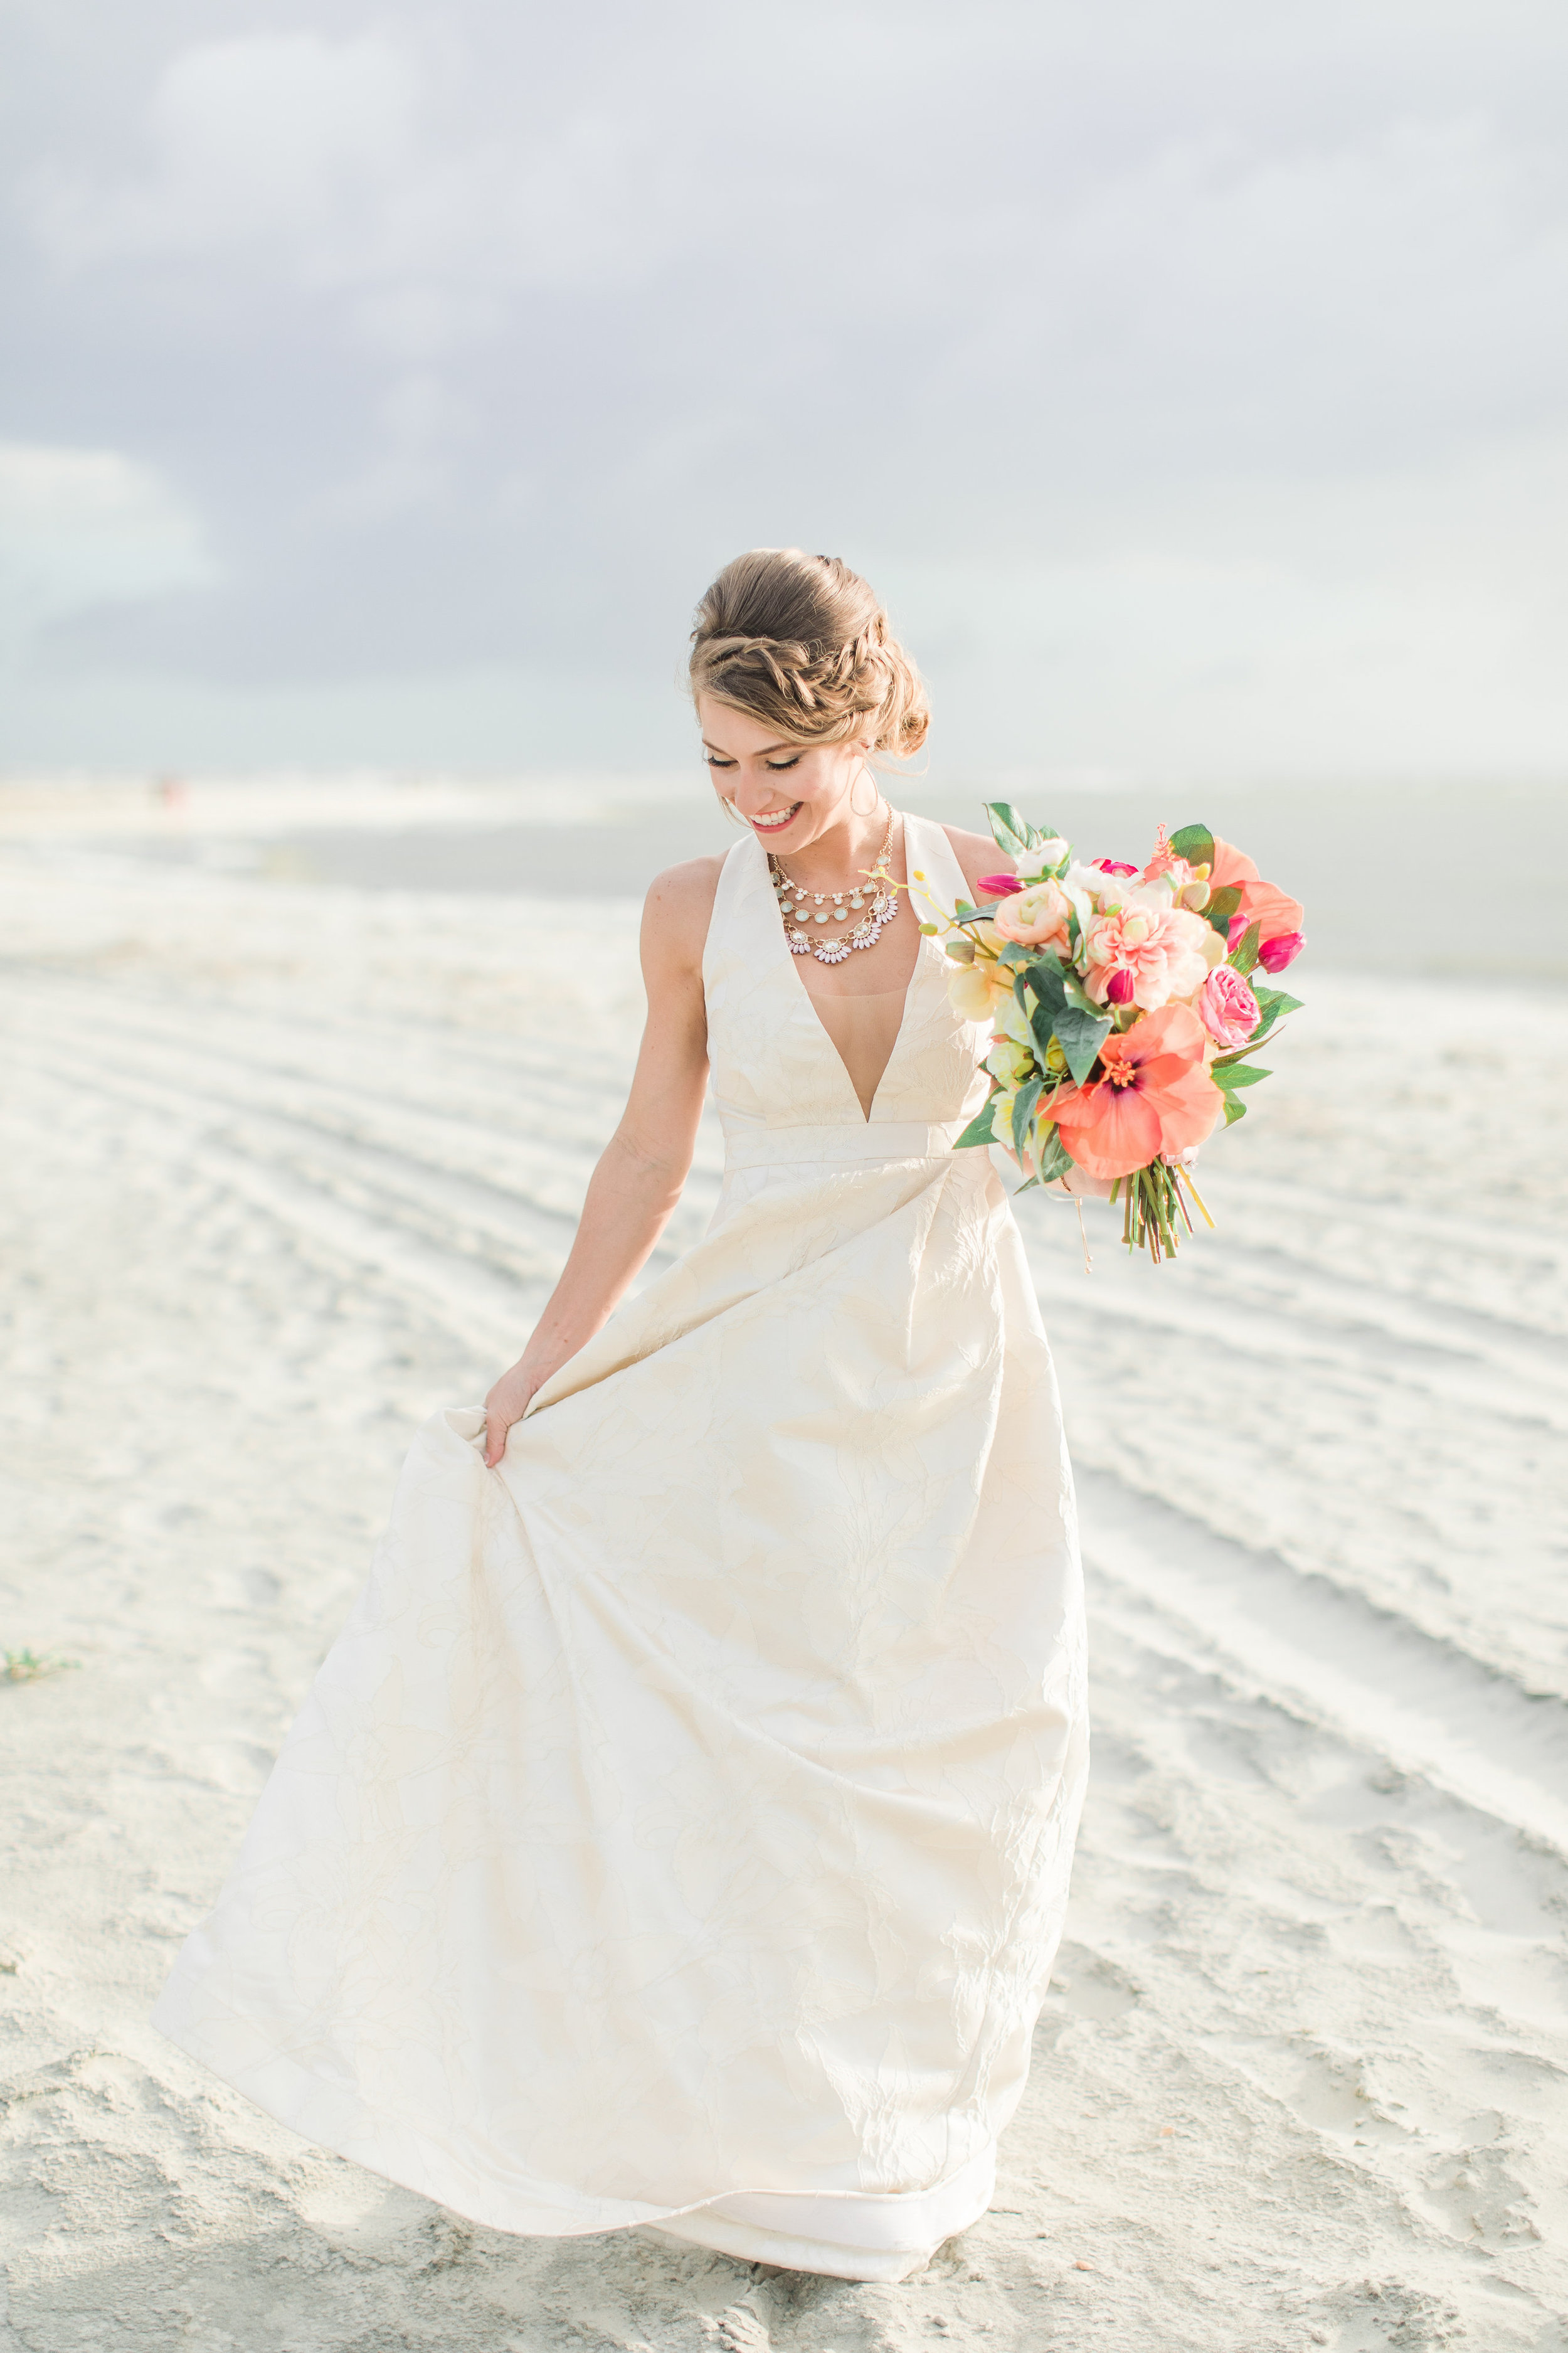 Brides on the Beach: 5 Tips to Help You Get the Most Out Of Your Sandy ...